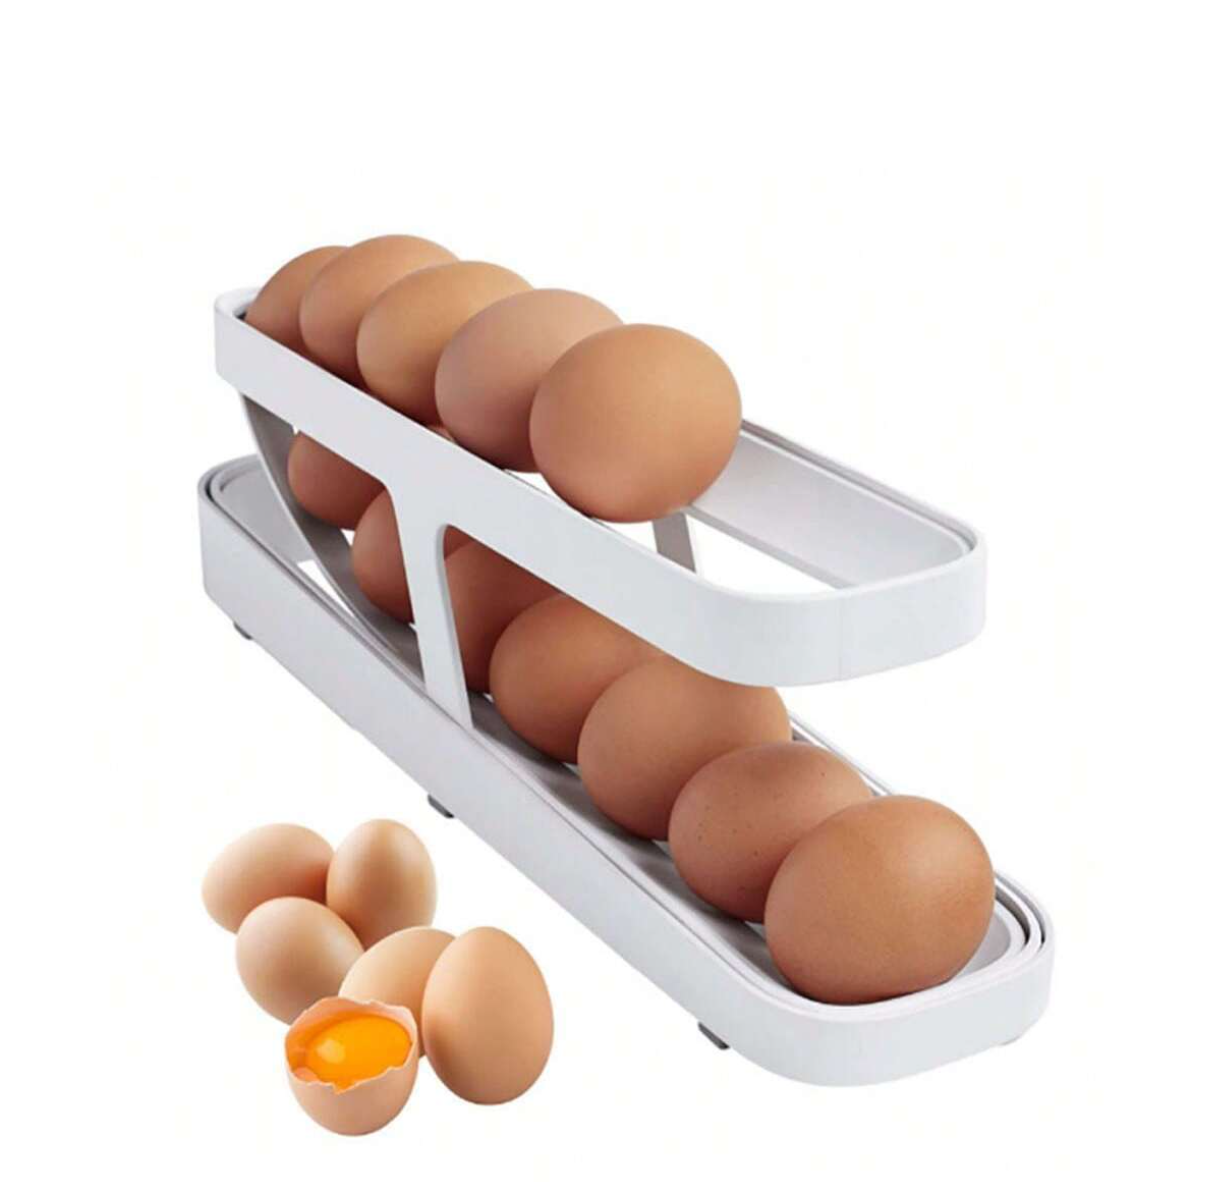 Eggcellent Roll-Down Dispenser: Space-Saving, Anti-Stick White Holder for All Chicken and Duck Eggs!